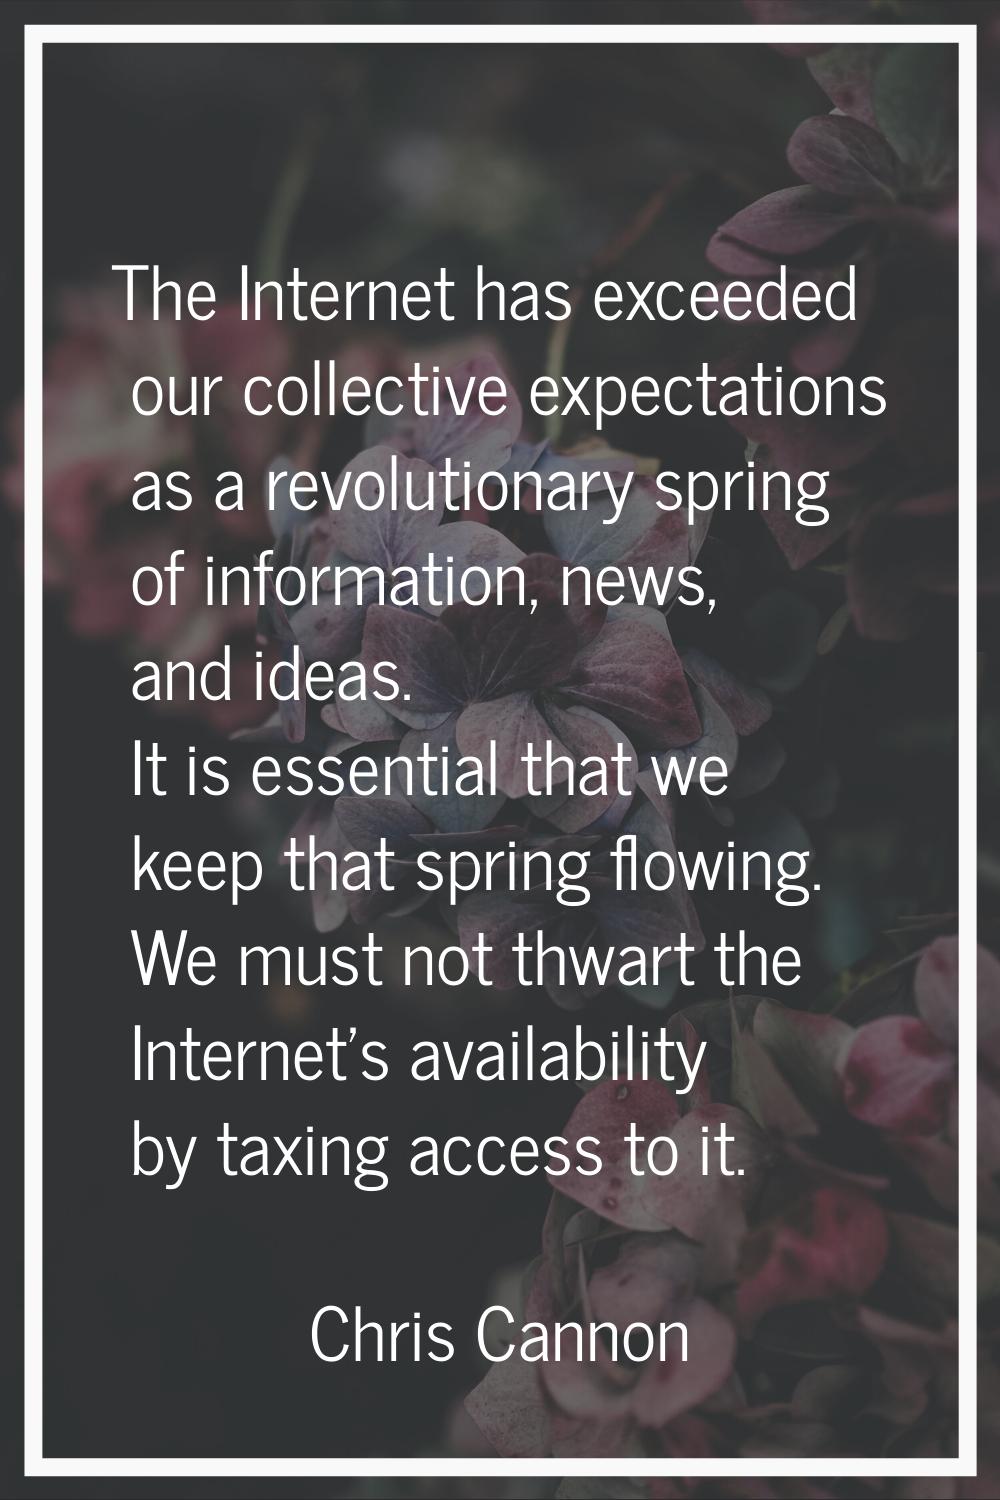 The Internet has exceeded our collective expectations as a revolutionary spring of information, new